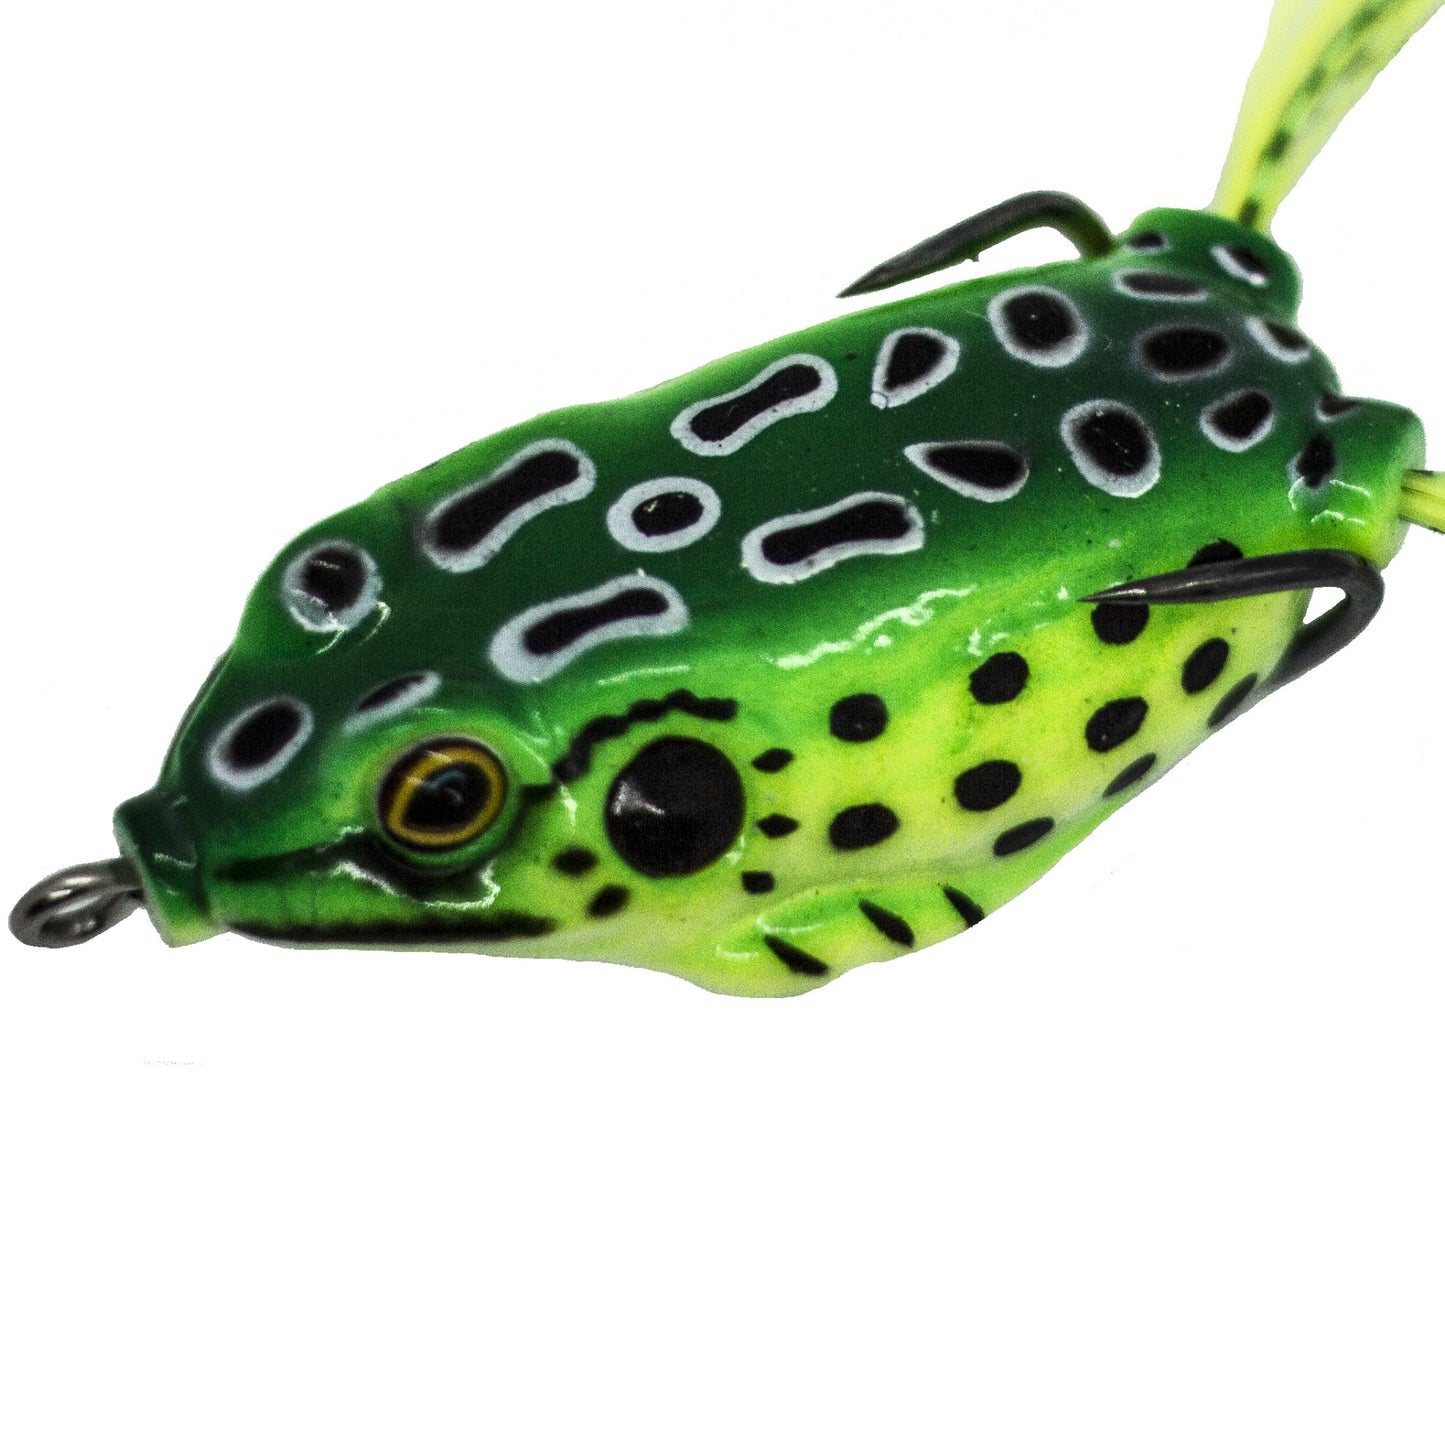 Topwater Frog Lure Bass Trout Fishing Lures Kit Set Realistic Prop